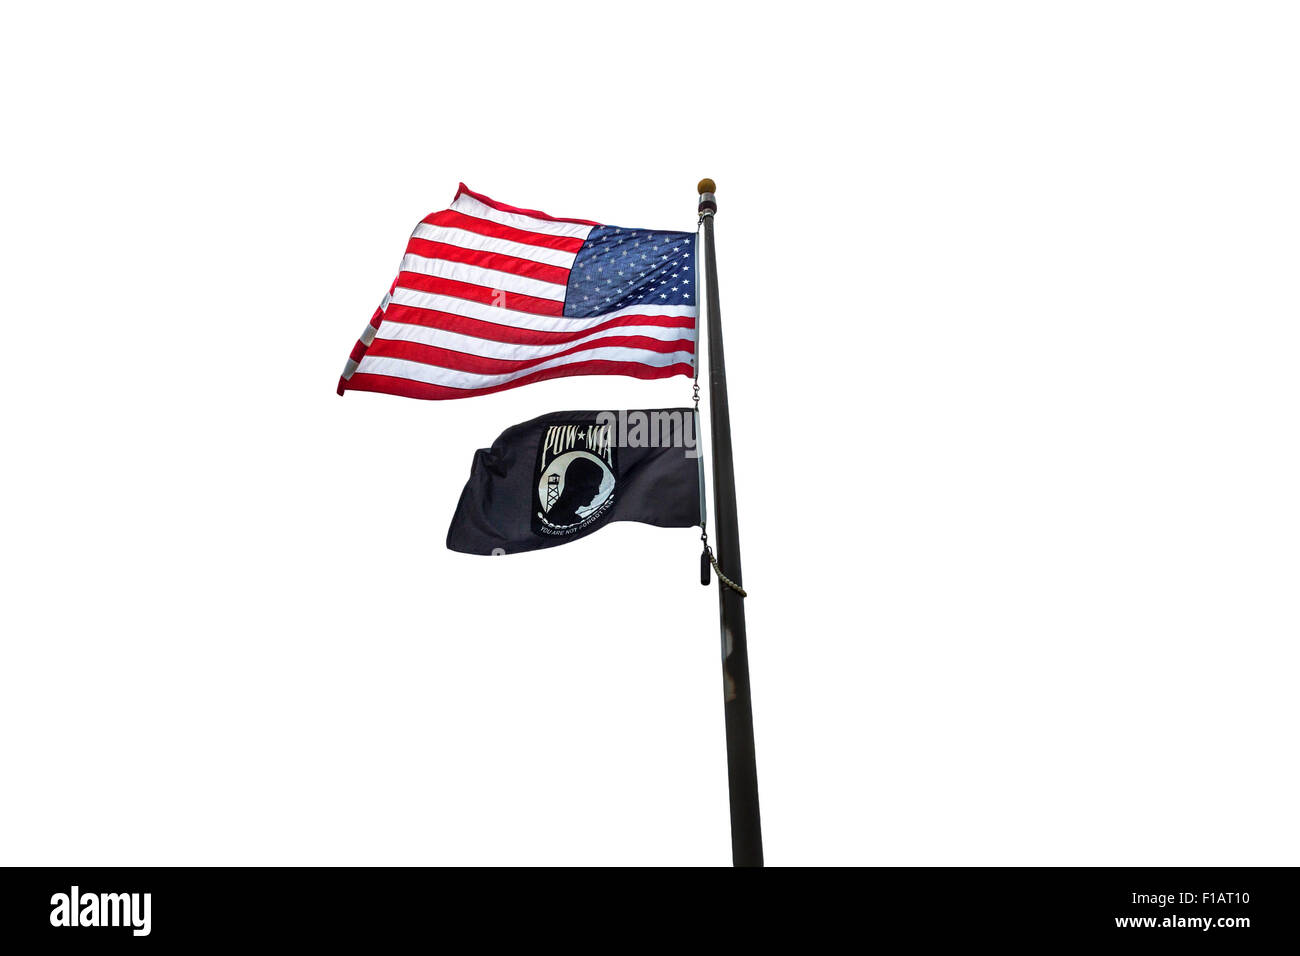 American and POW flags flying on display with a white background. Stock Photo